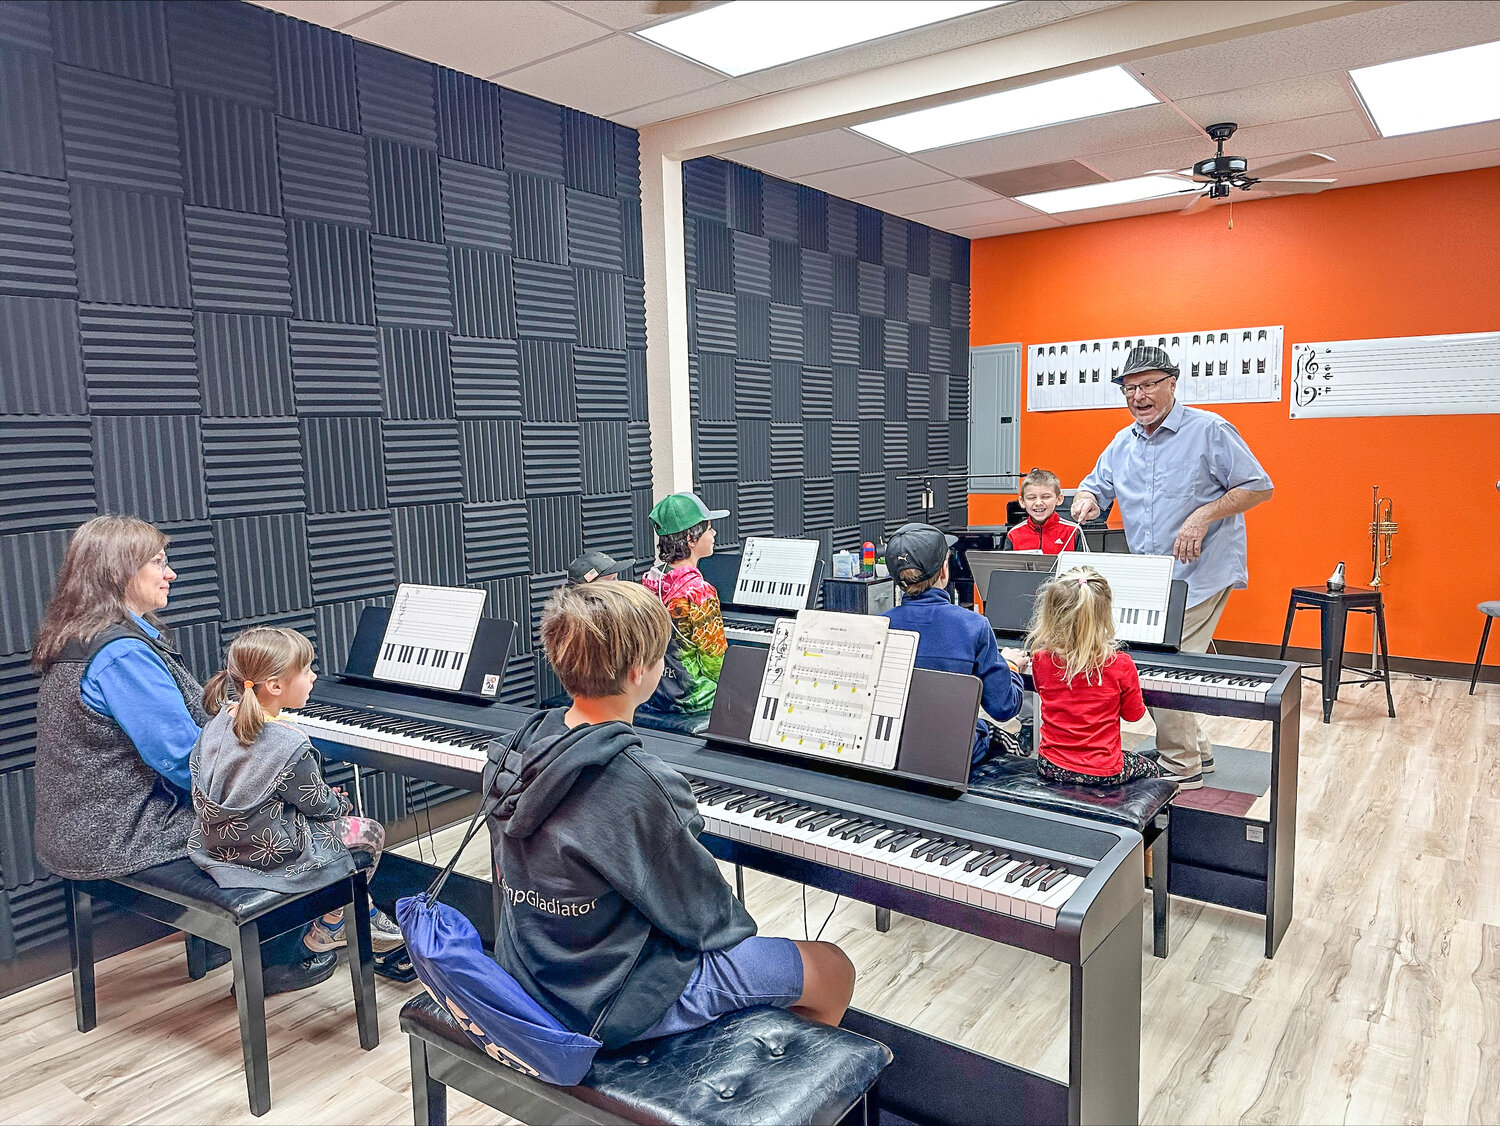 Michael Manning teaches piano to a group of young students at Sparks Music School.